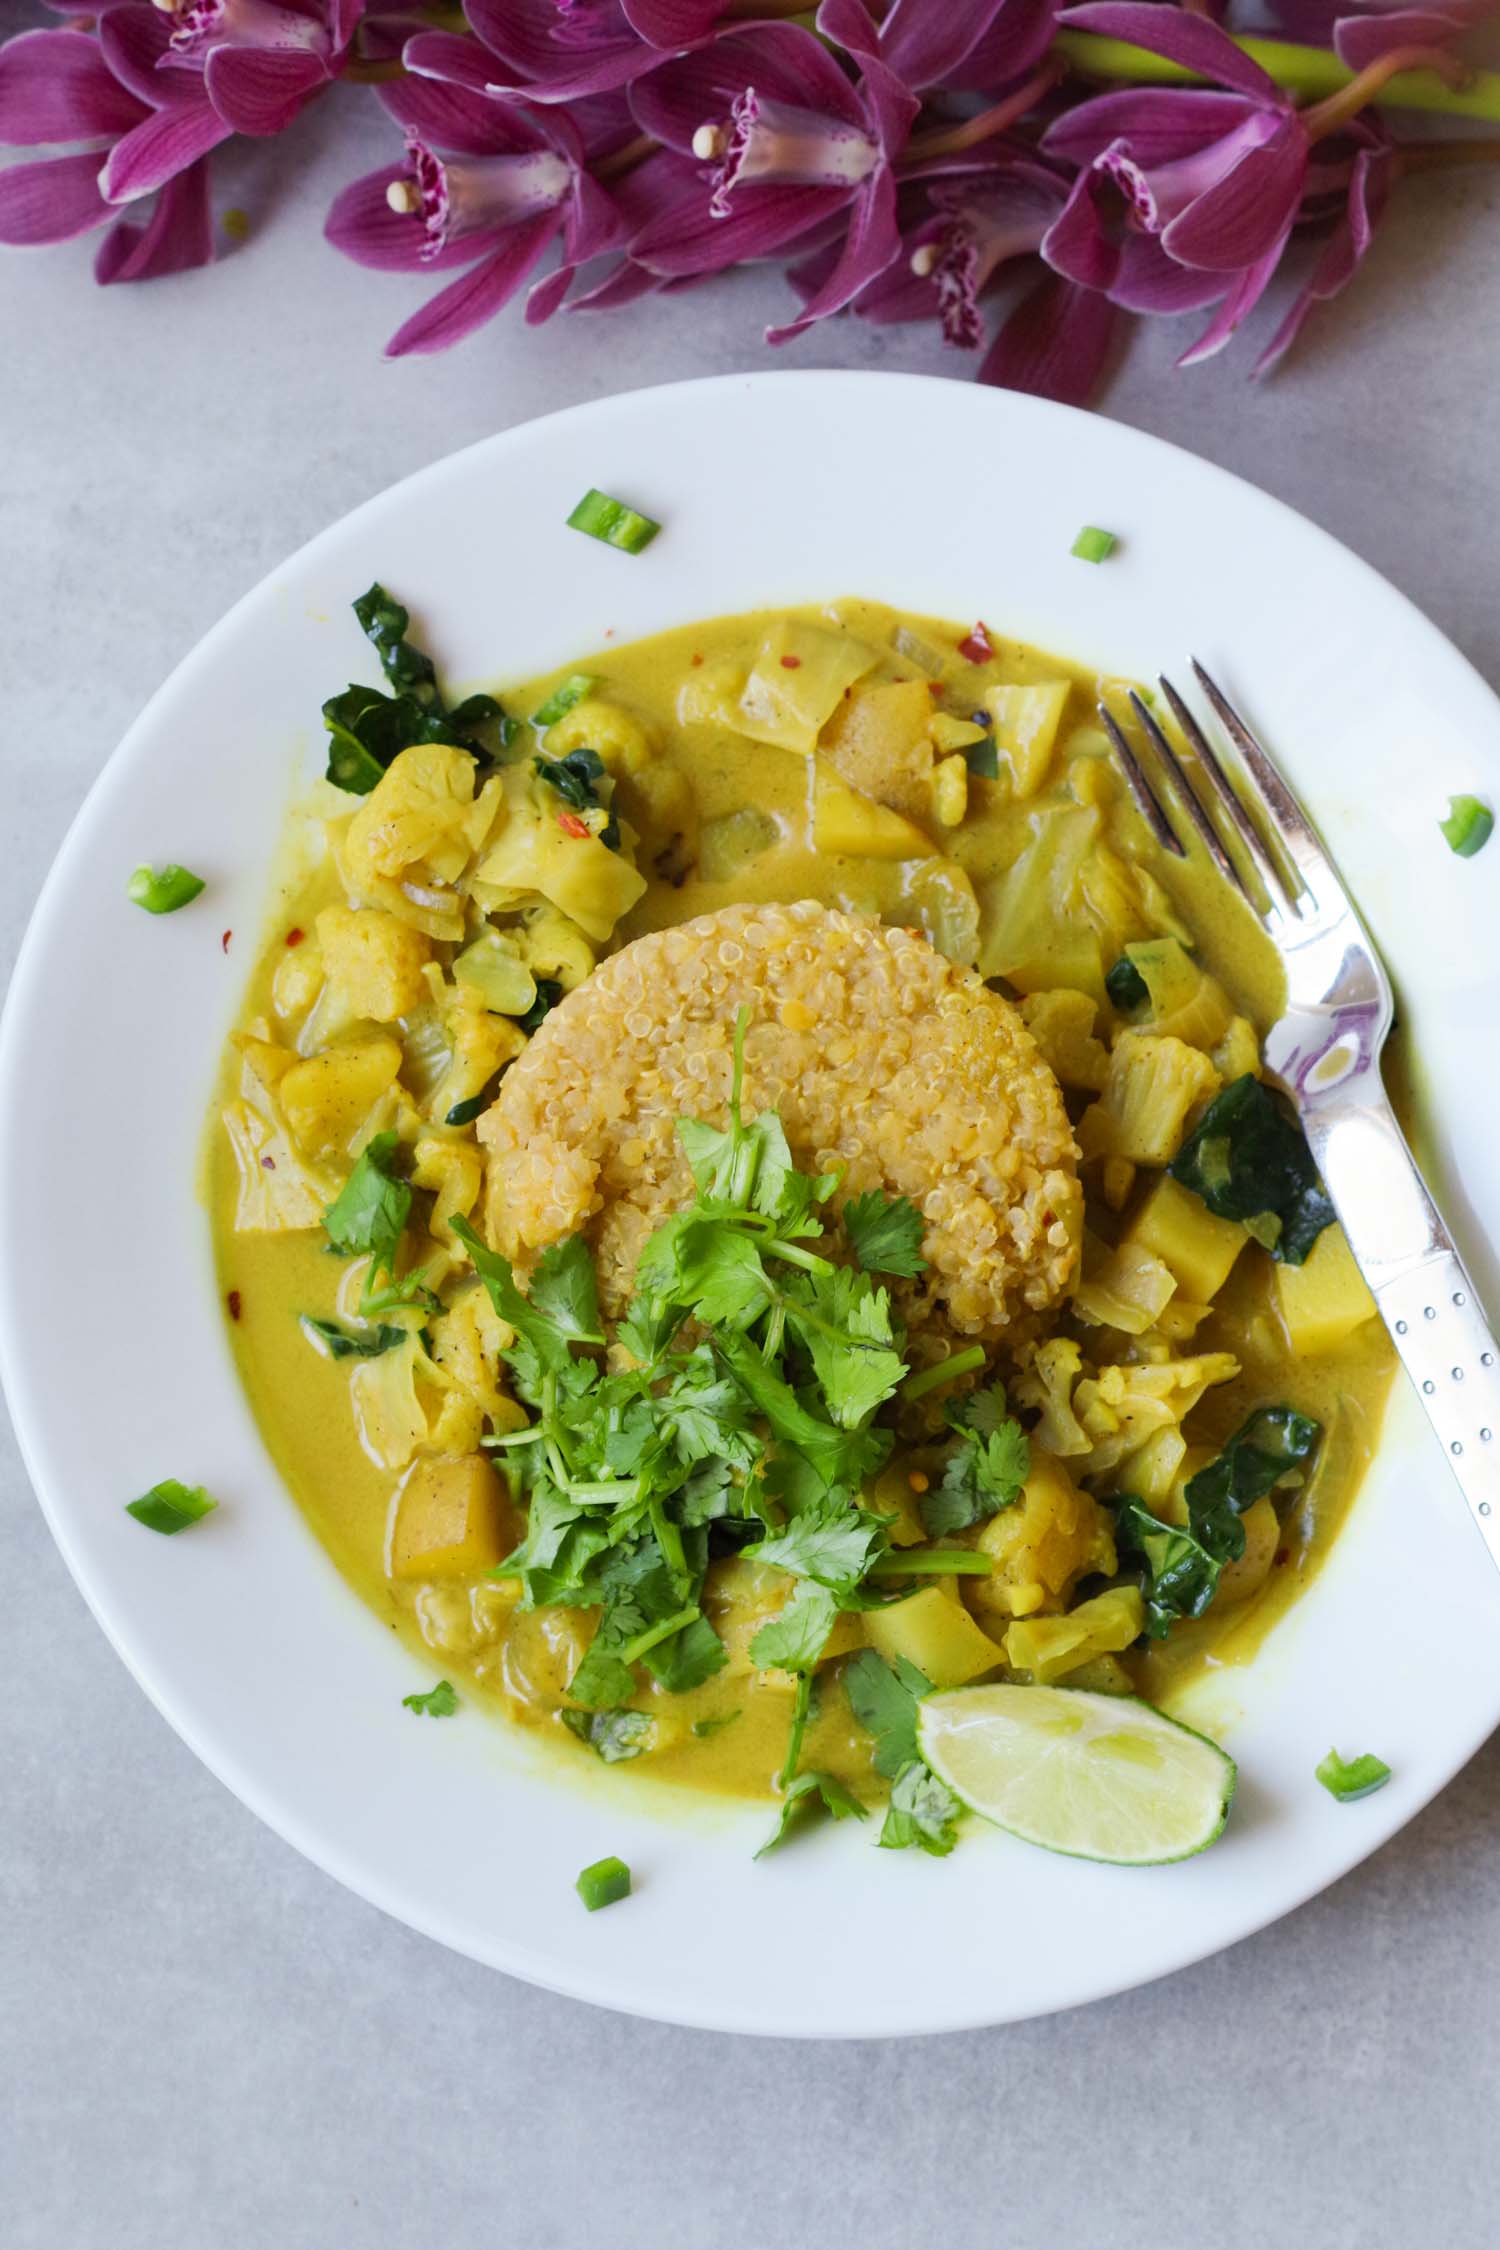 VEGETABLE CURRY READY IN ABOUT 30 MINUTES, BY BEAUTIFUL INGREDIENT